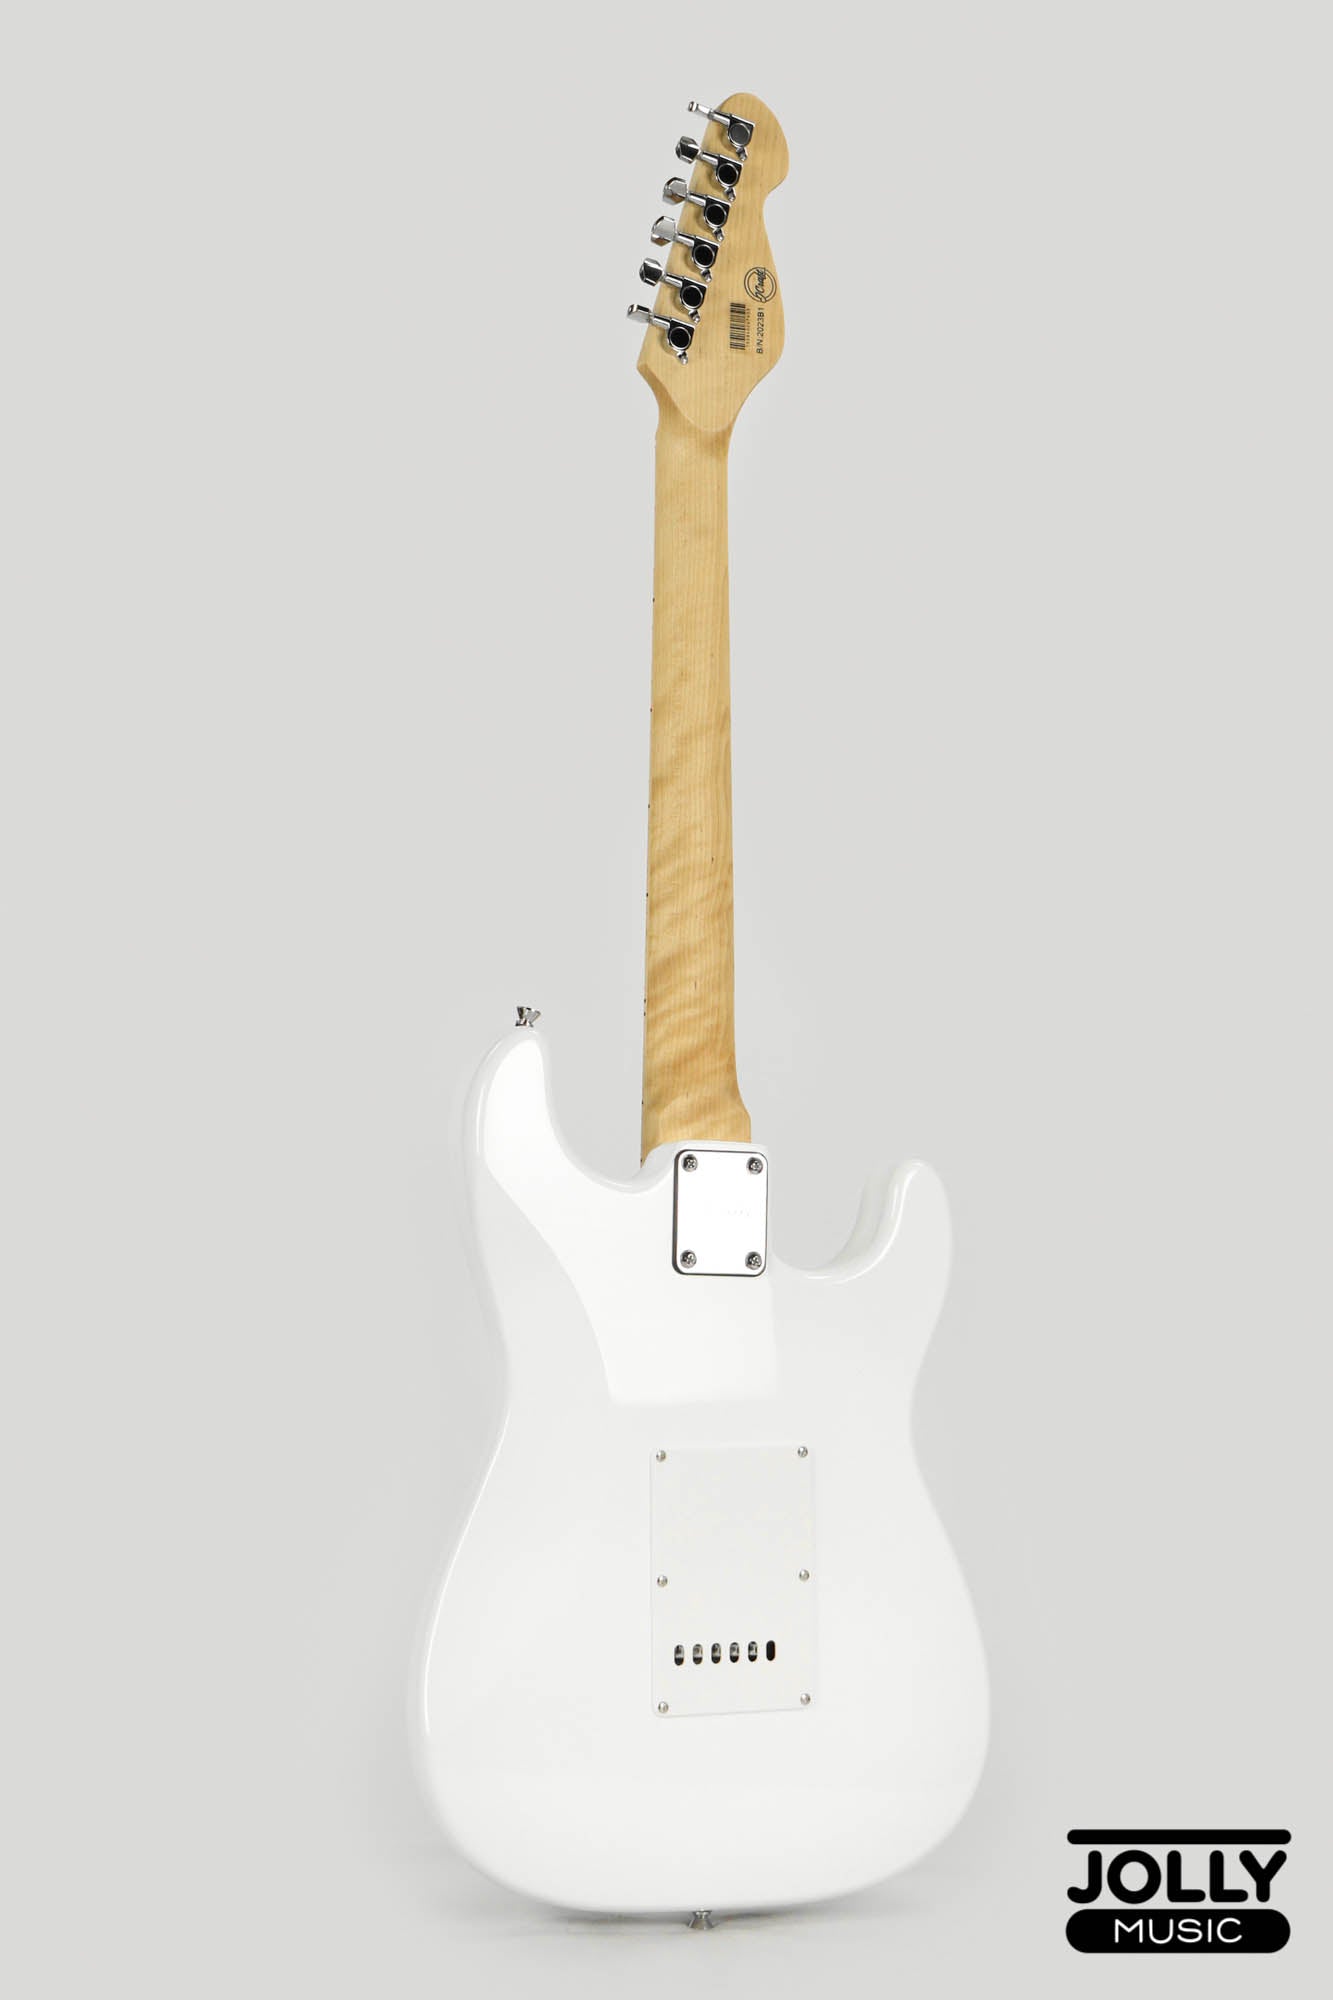 JCraft S-1 LEFT HAND S-Style Electric Guitar with Gigbag - White